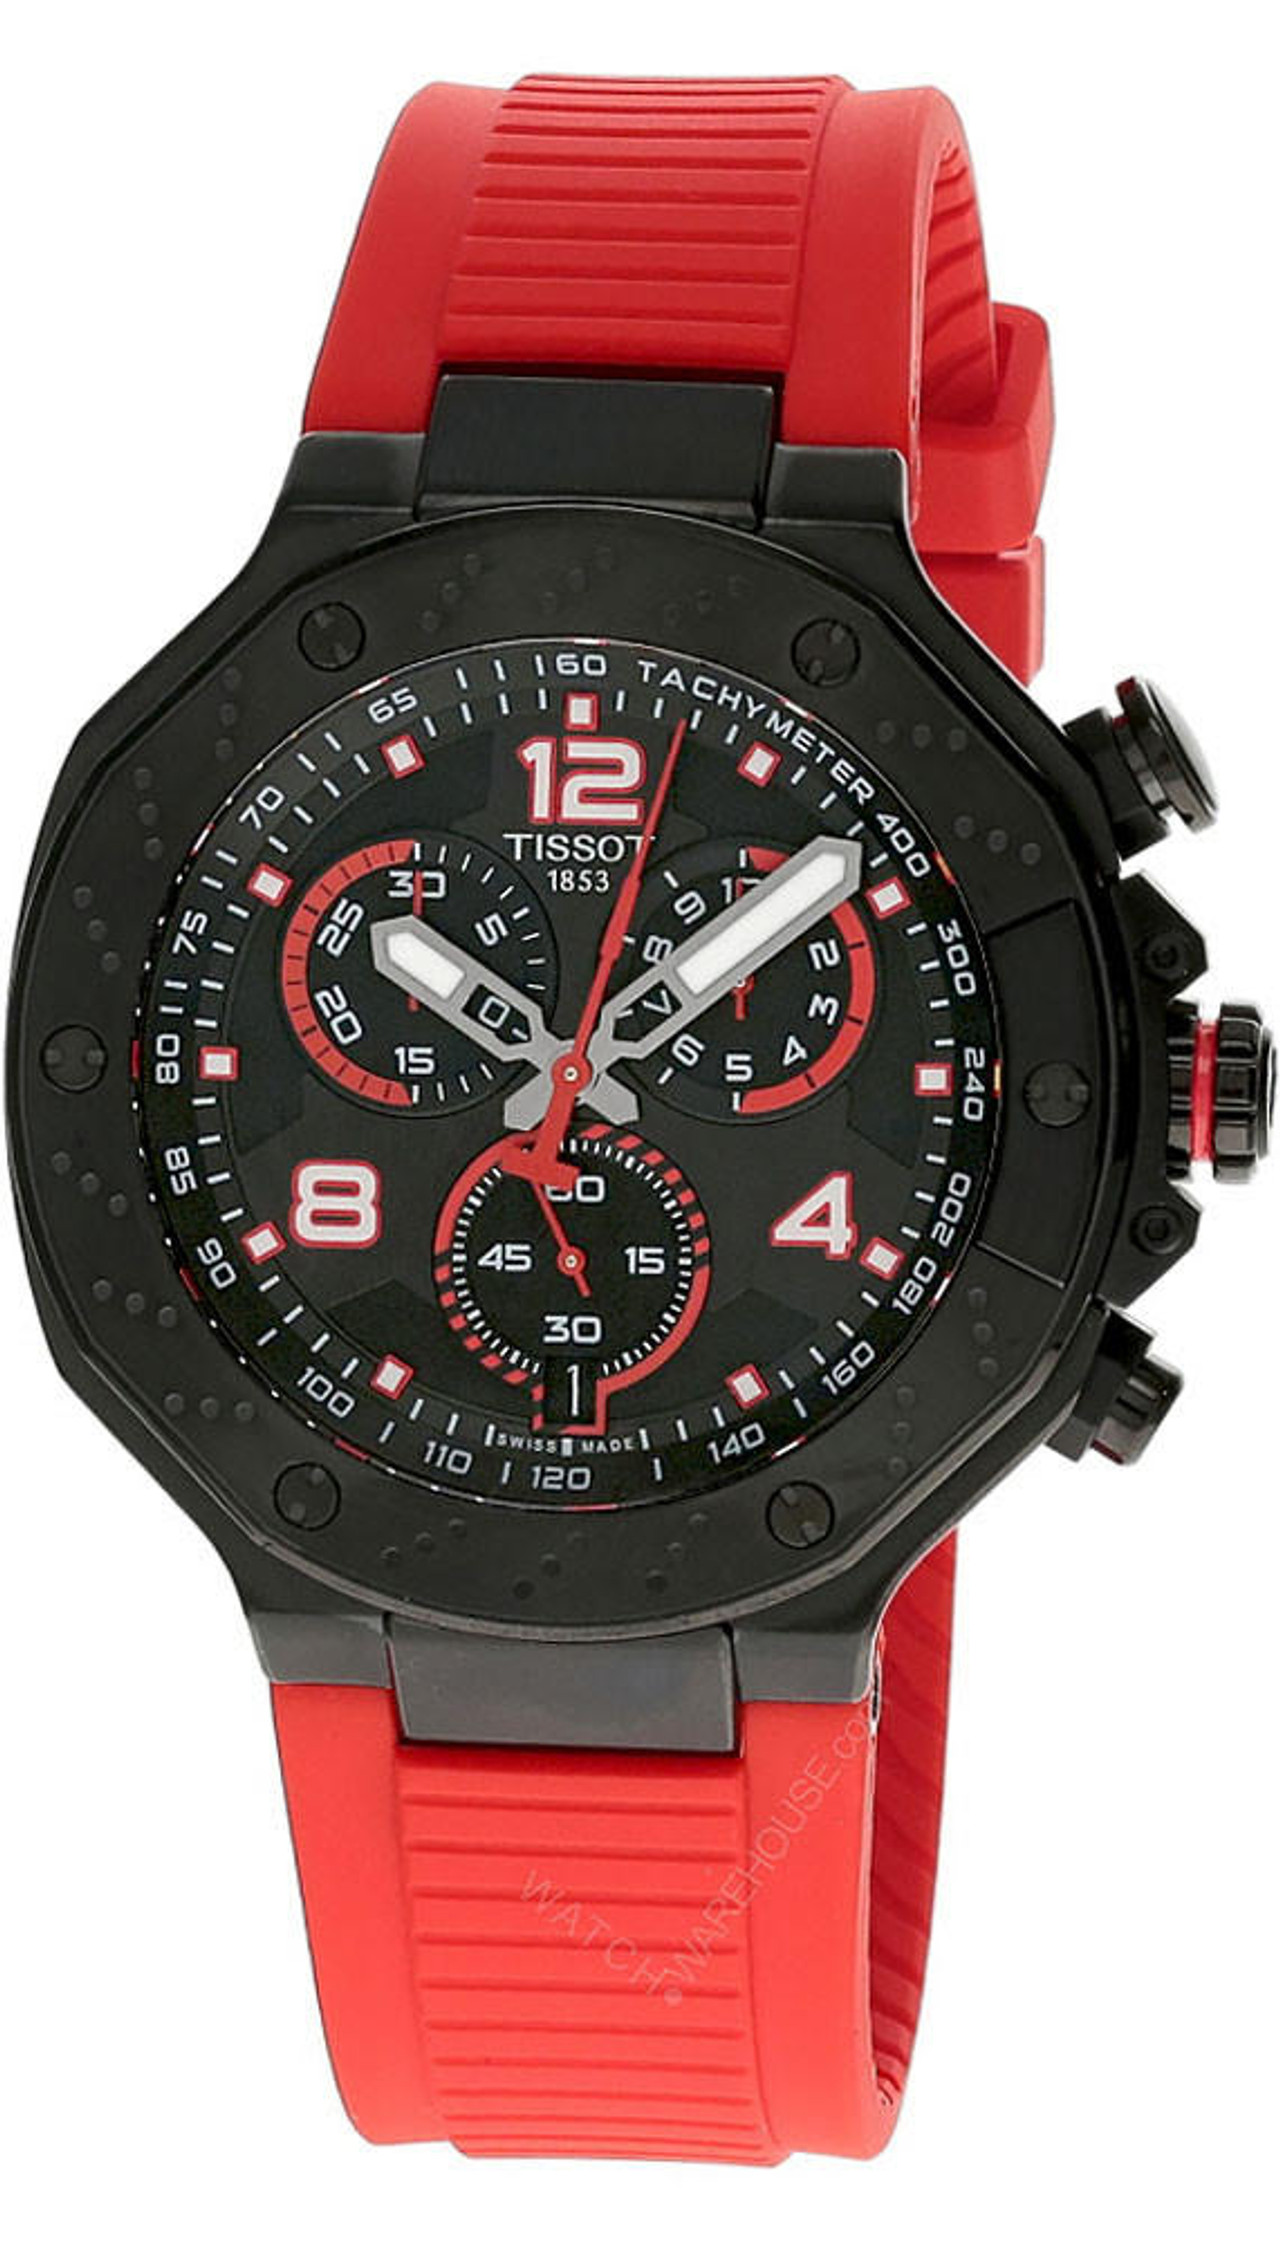 TISSOT T-Race MotoGP 2023 Limited Edition 45MM Rubber Mens Watch T141.417.37.057.01 Fast and Free US Shipping Watch Warehouse